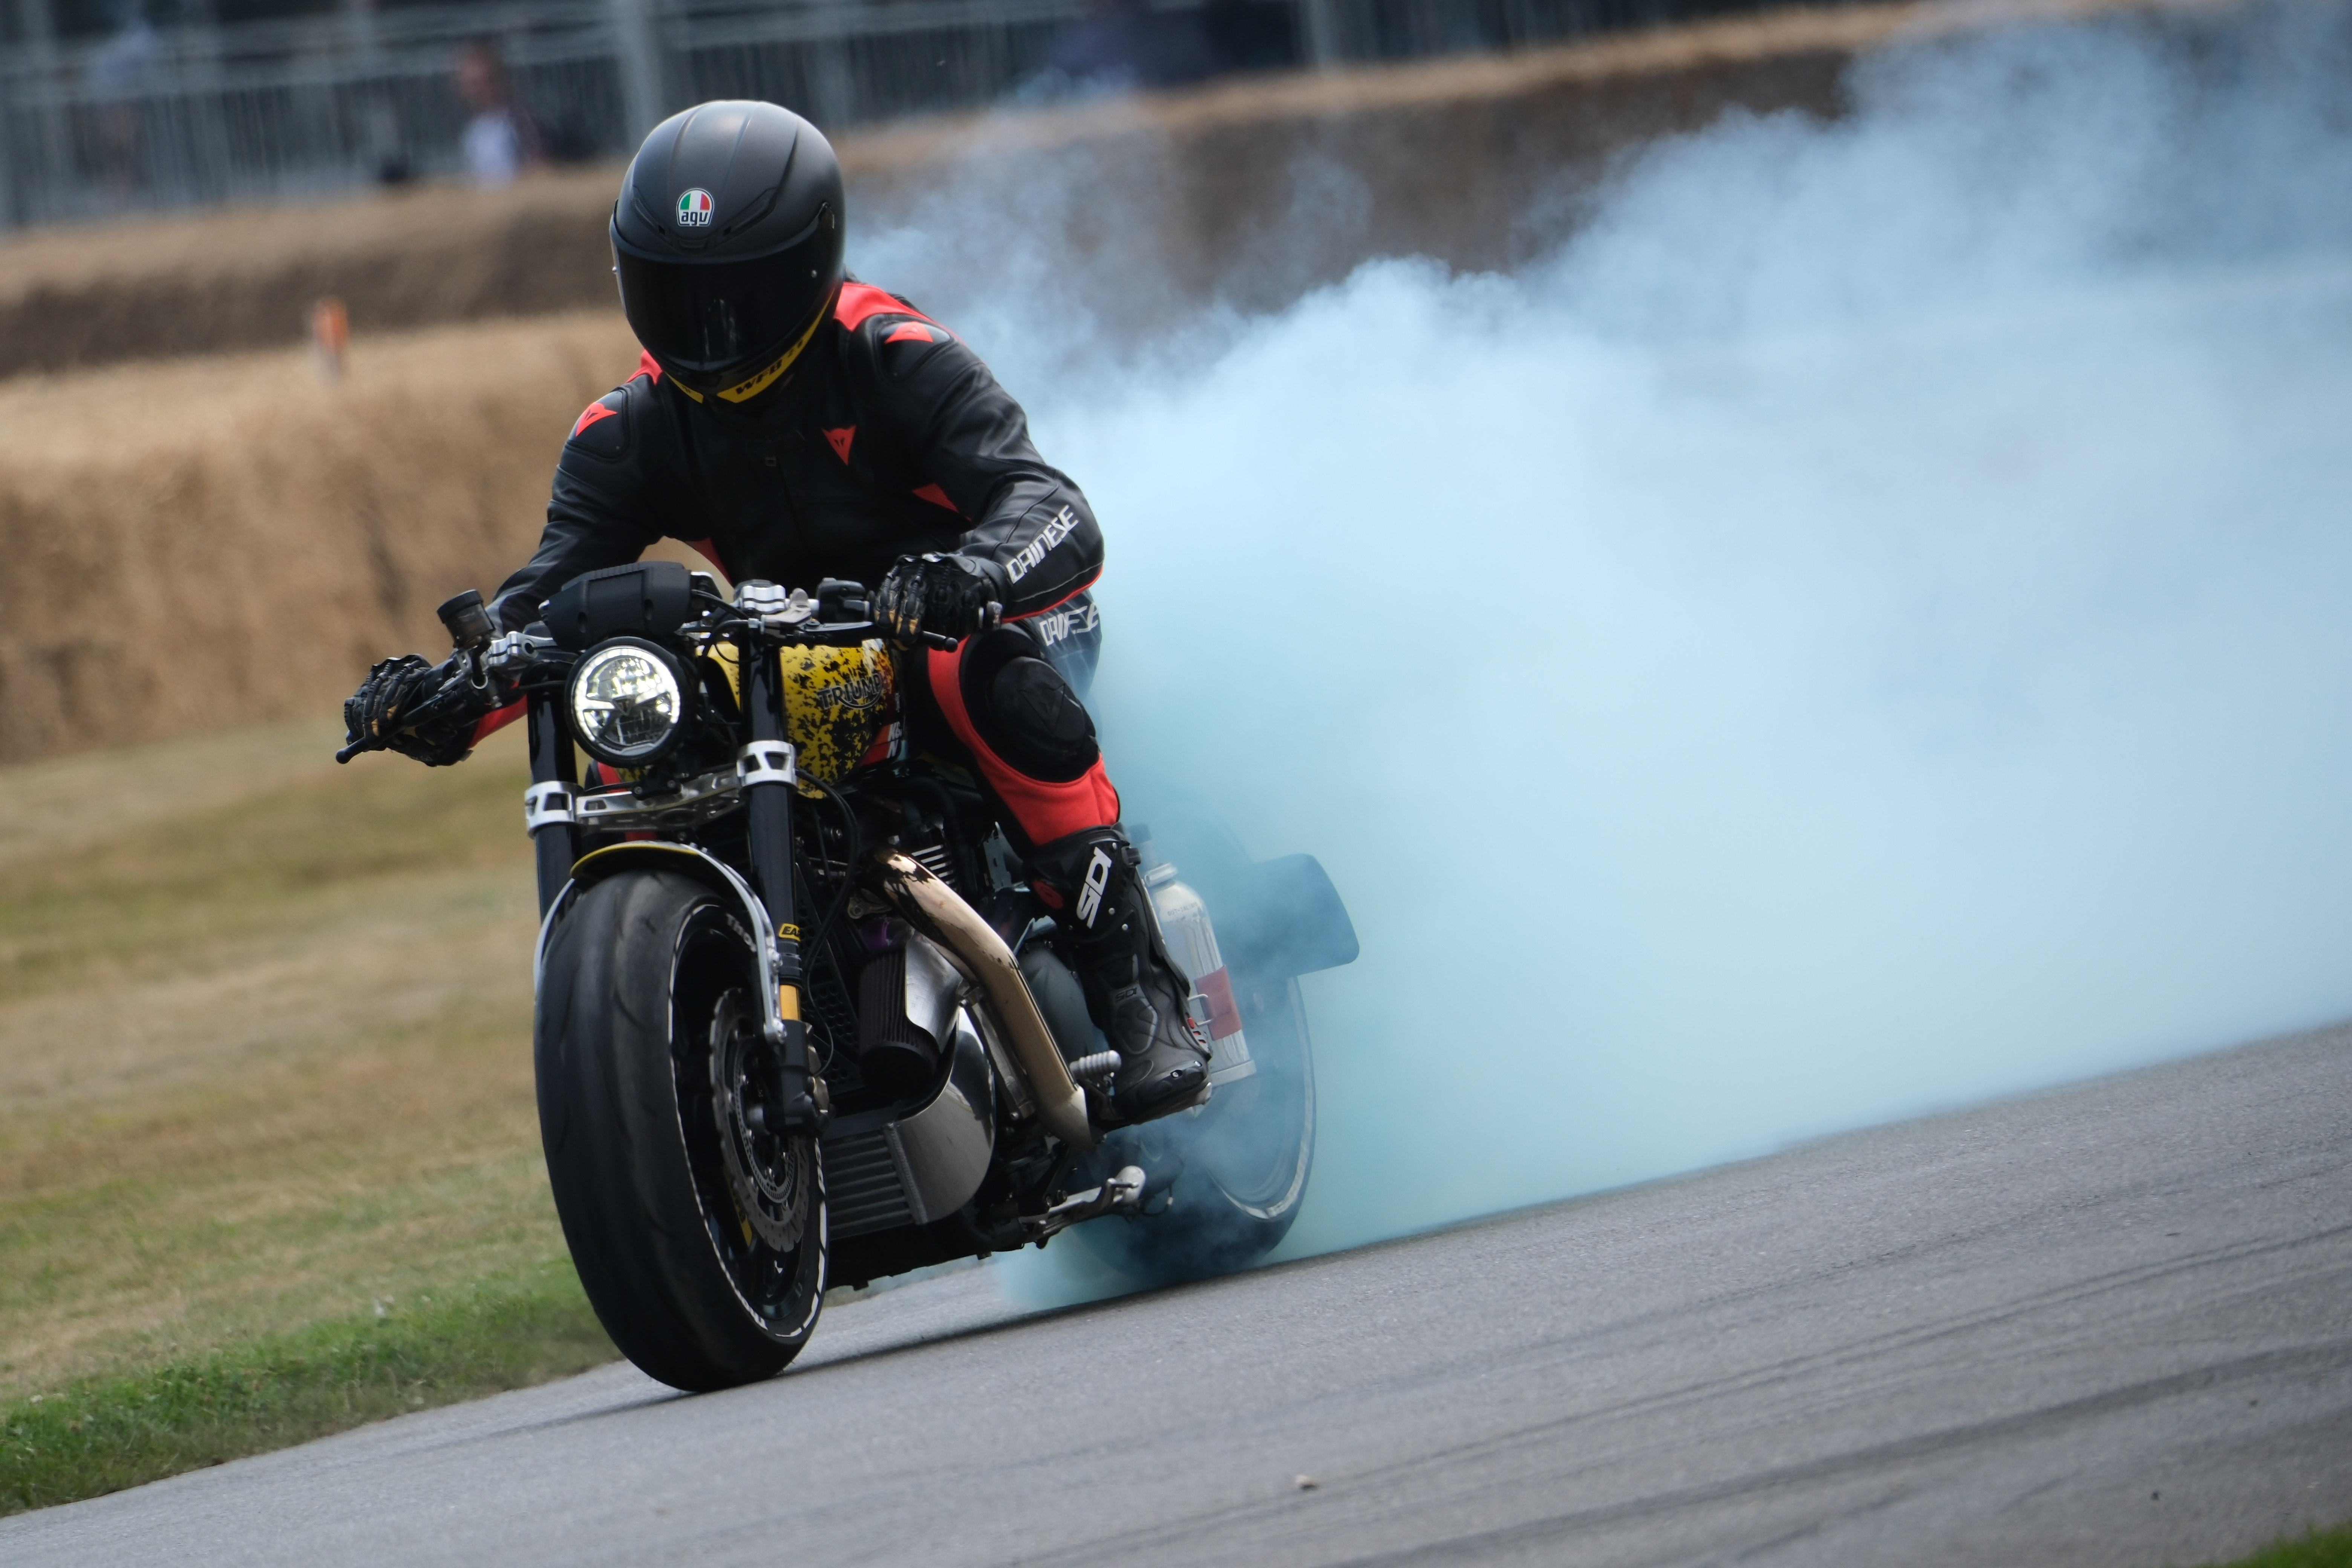 Motorbike smoke at Goodwood Festival of speed, photo: Joshua Waller, X-H2s, 1/1250s, f/7.1, ISO640, 451mm (677mm equivalent)